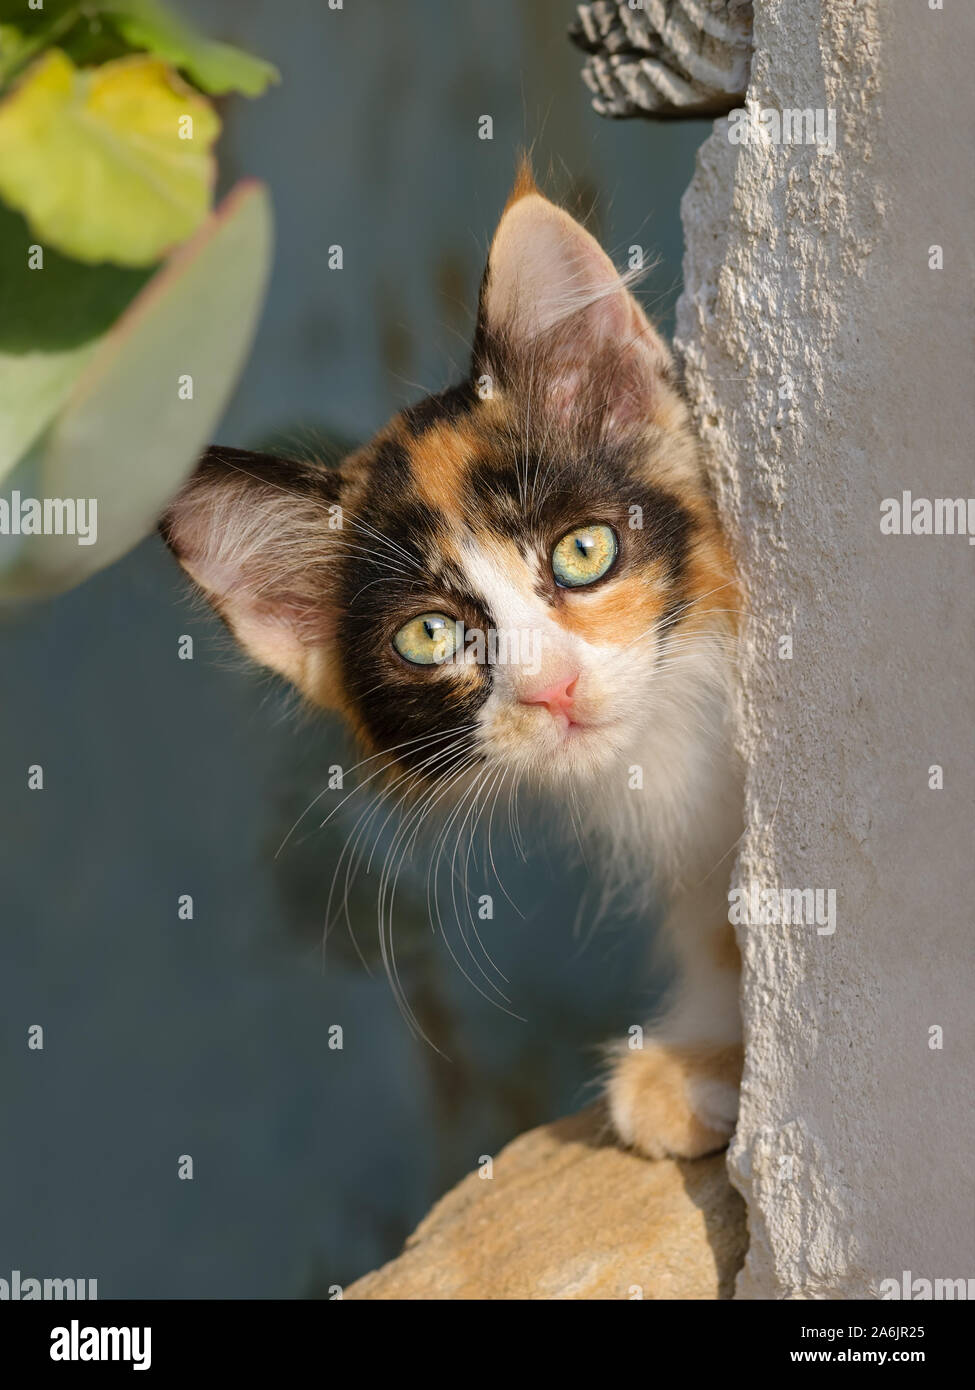 Curious cat kitten, tricolor calico patched tabby, peering from behind a wall with wonderful colored eyes, Cyprus Stock Photo